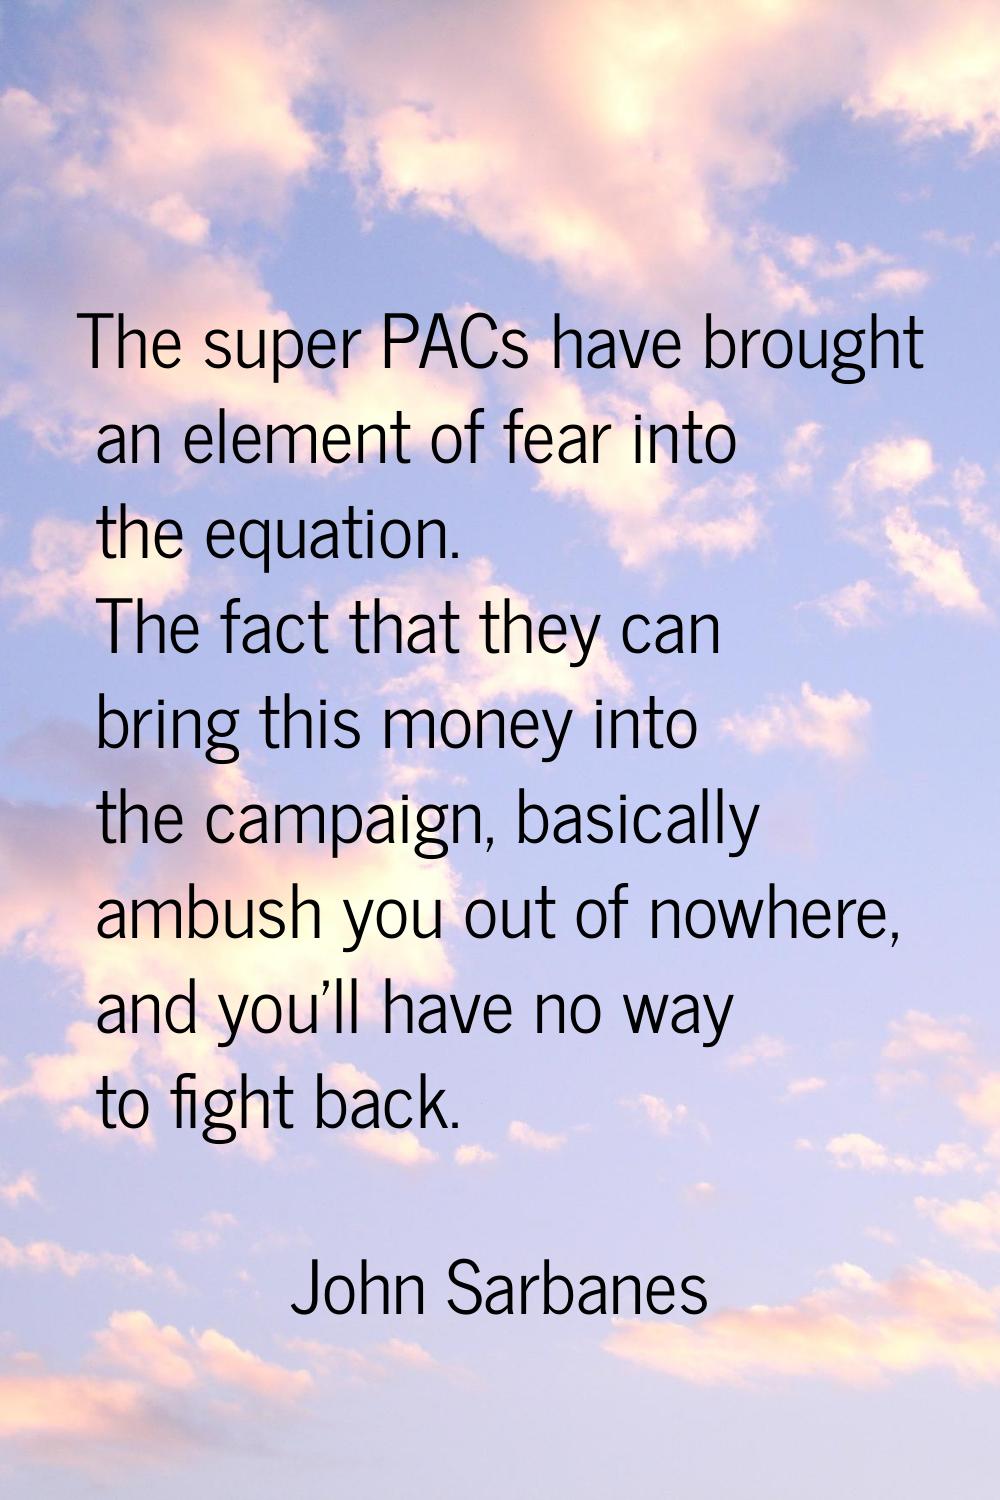 The super PACs have brought an element of fear into the equation. The fact that they can bring this